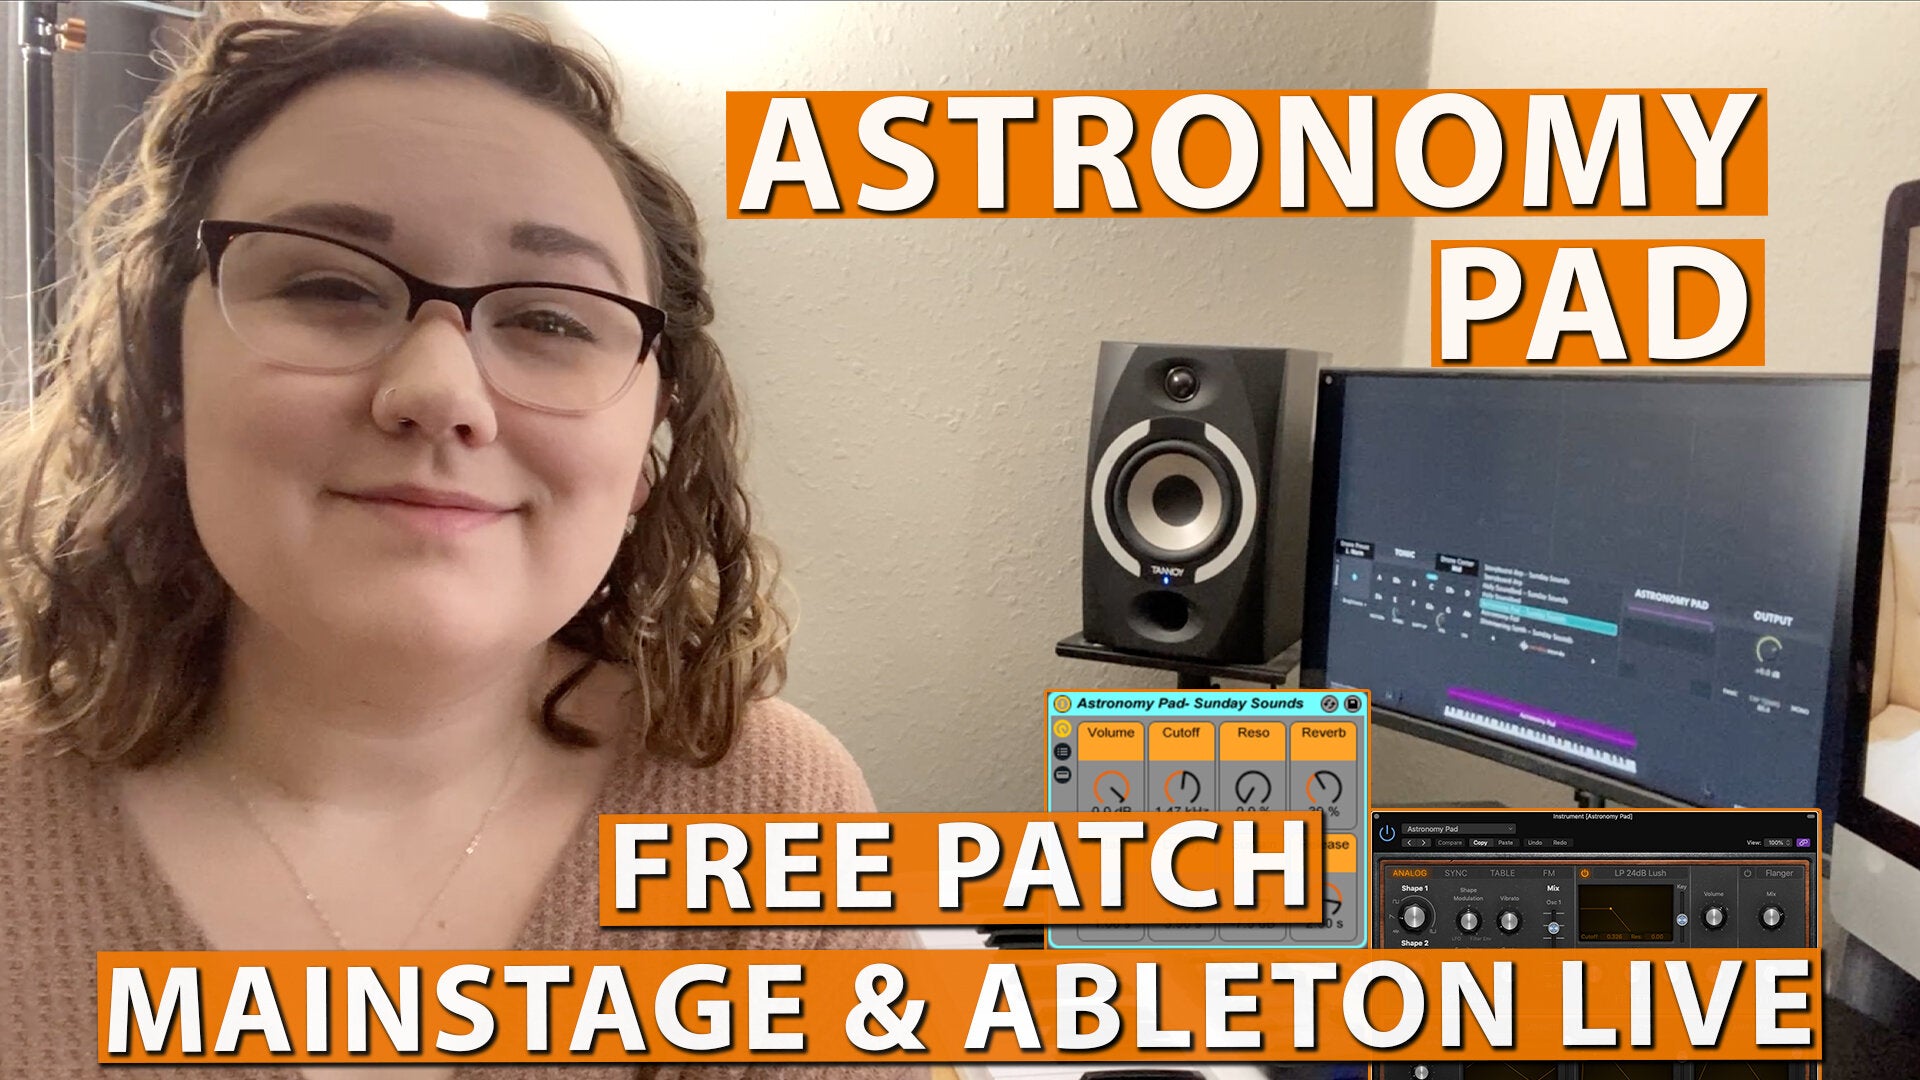 Free MainStage & Ableton Worship Patch! - Astronomy Pad